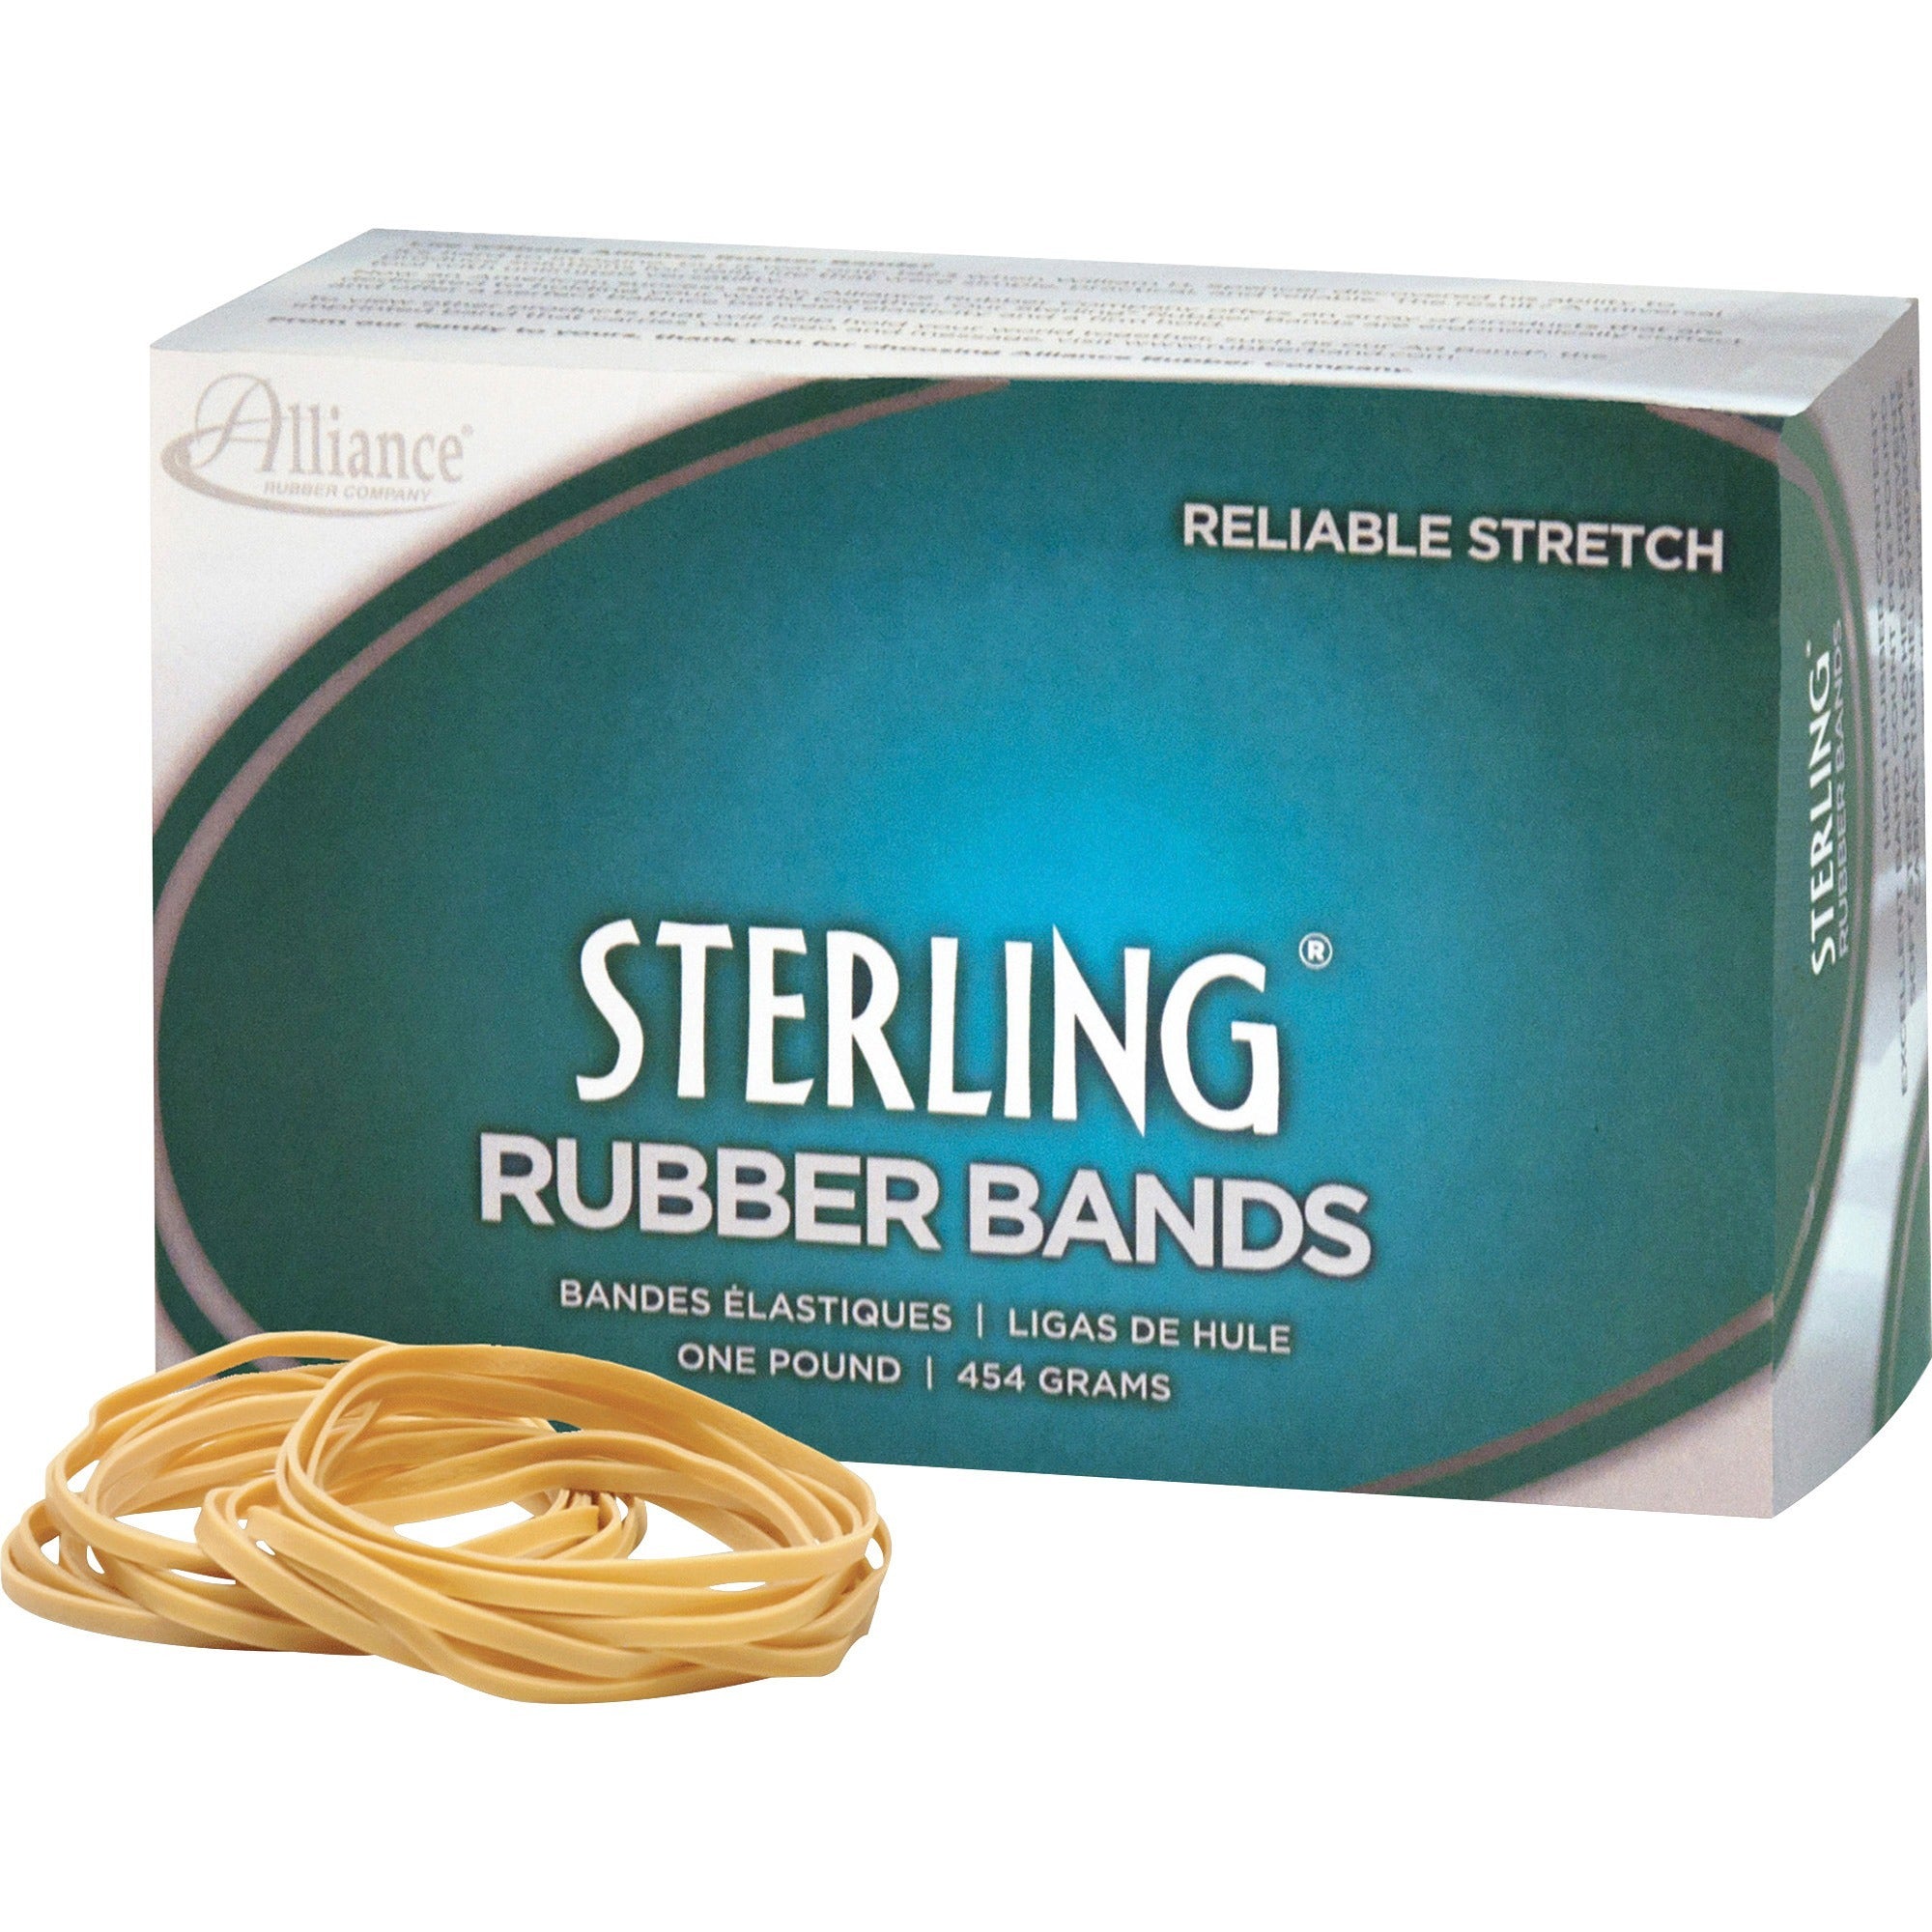 Alliance Rubber 24185 Sterling Rubber Bands - Size #18 - Approx. 1900 Bands - 3" x 1/16" - Natural Crepe - 1 lb Box - 